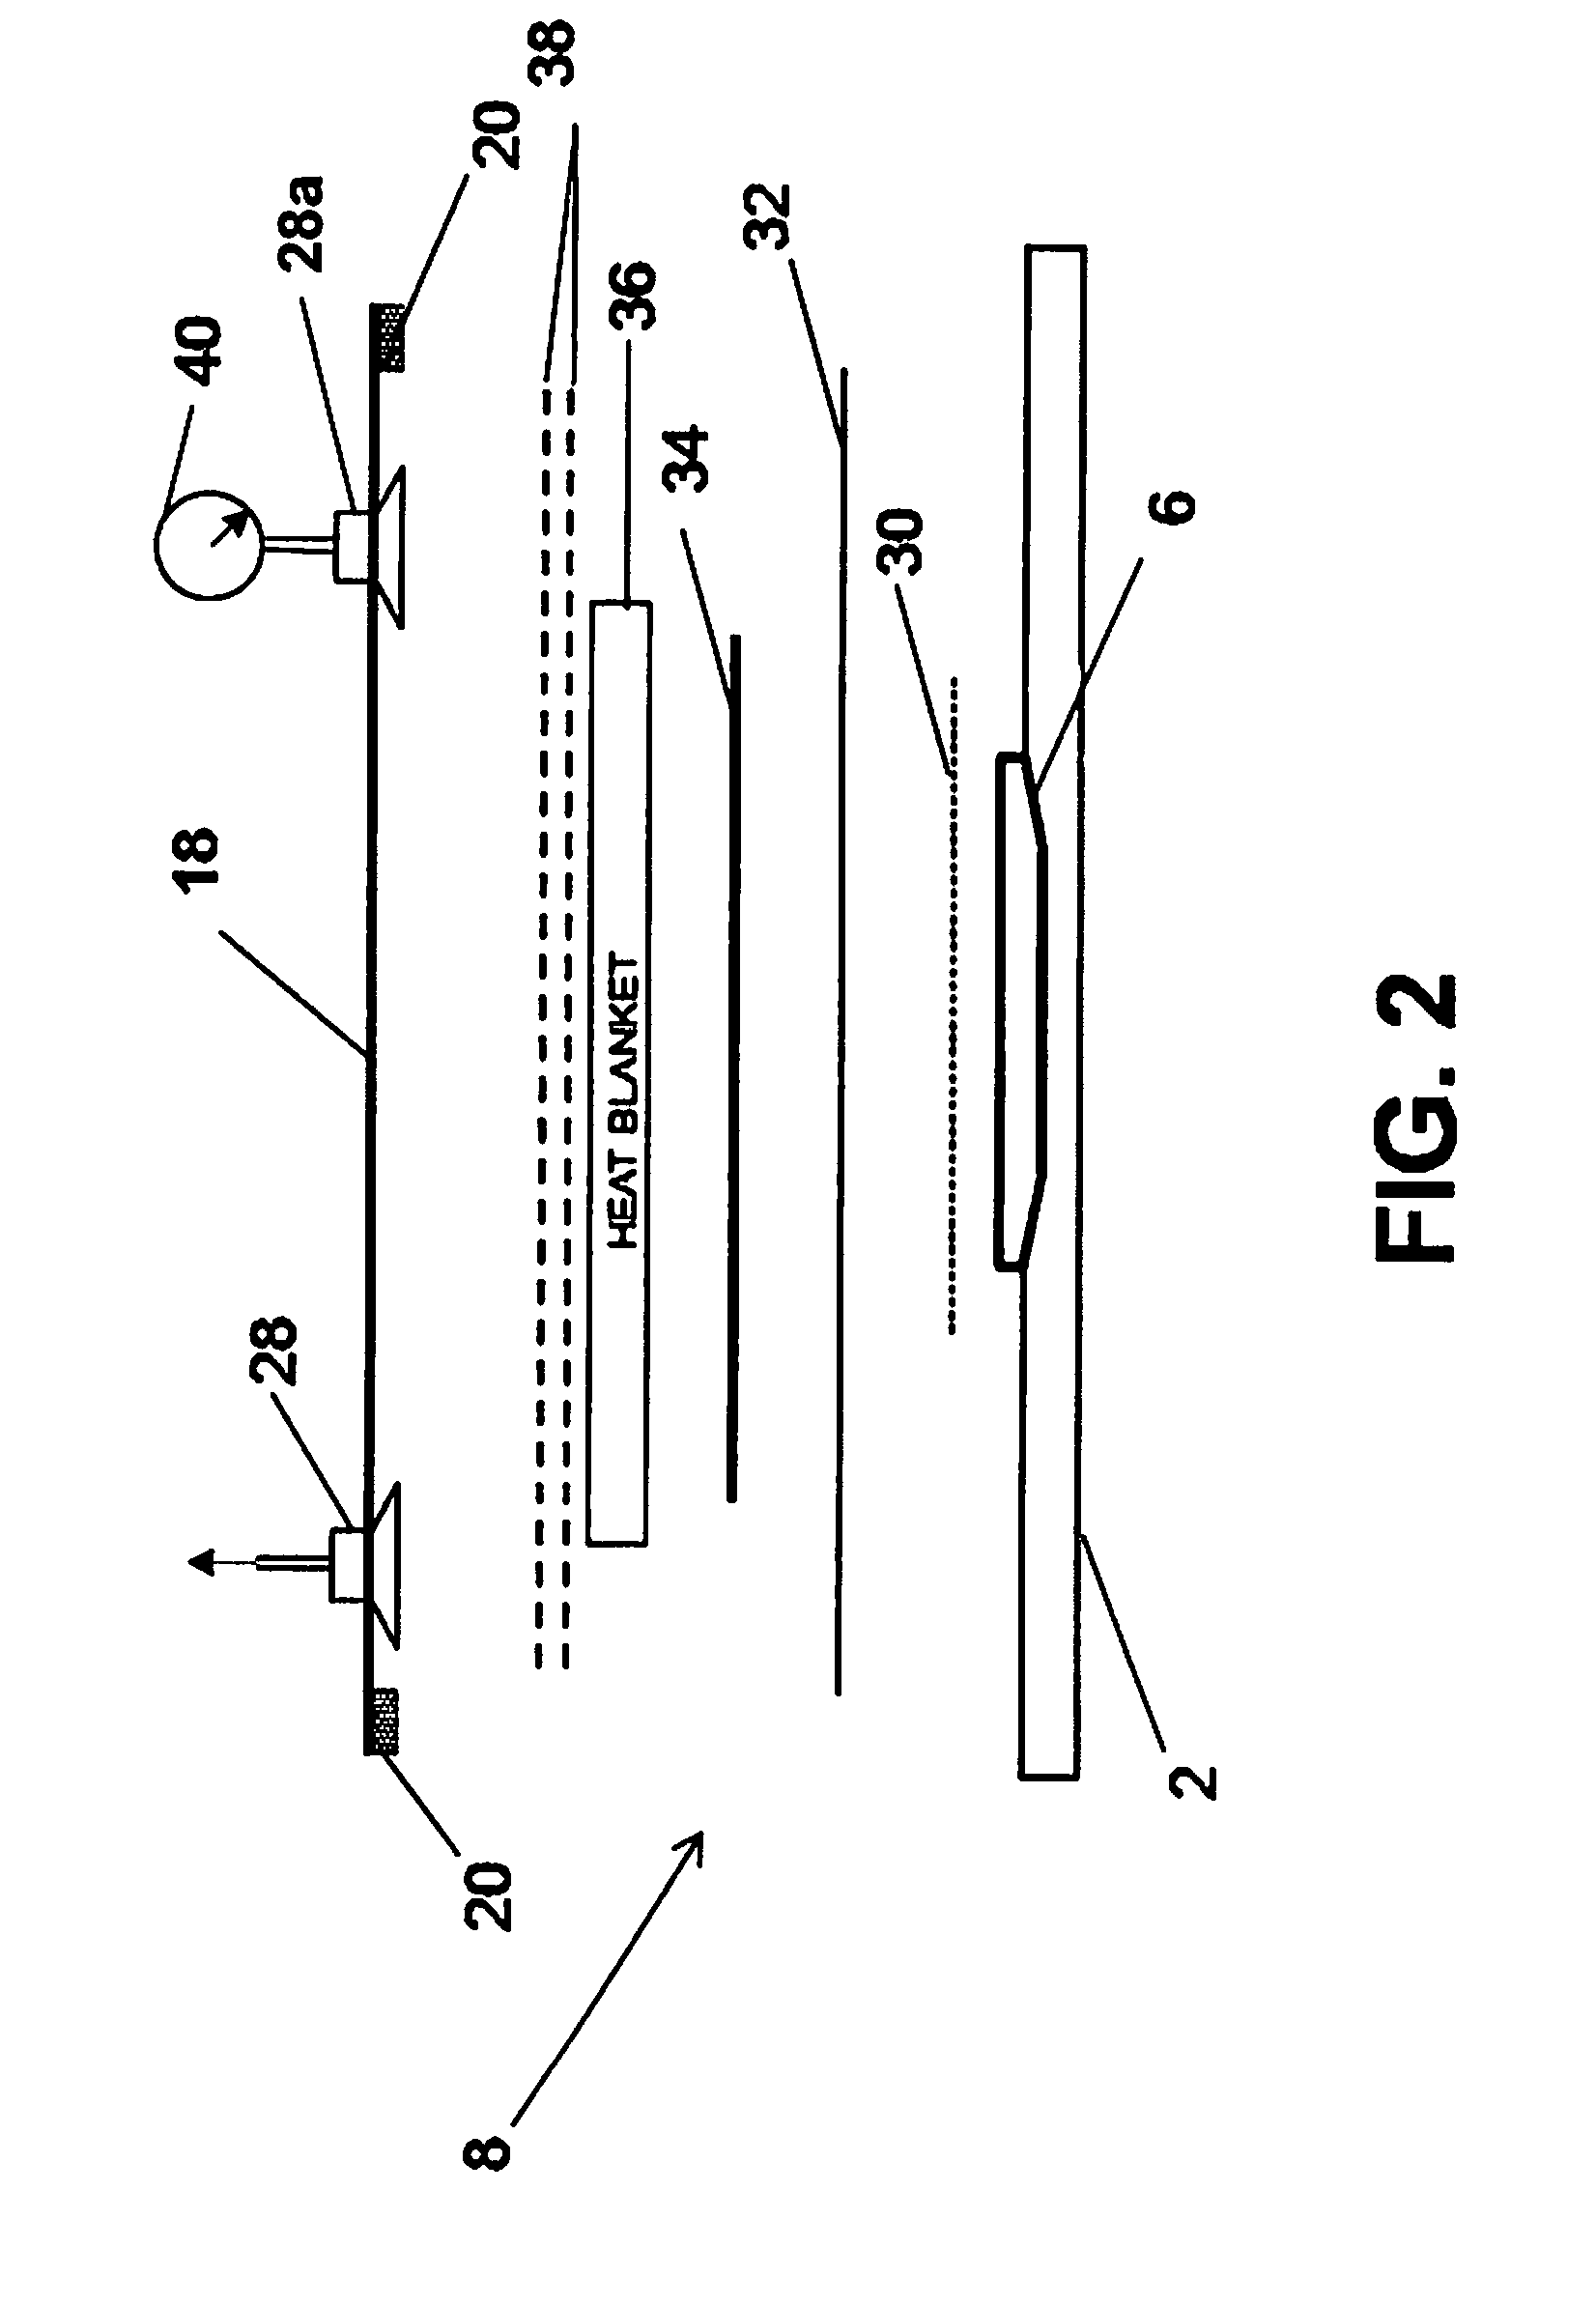 Systems and Methods for On-Aircraft Composite Repair Using Double Vacuum Debulking